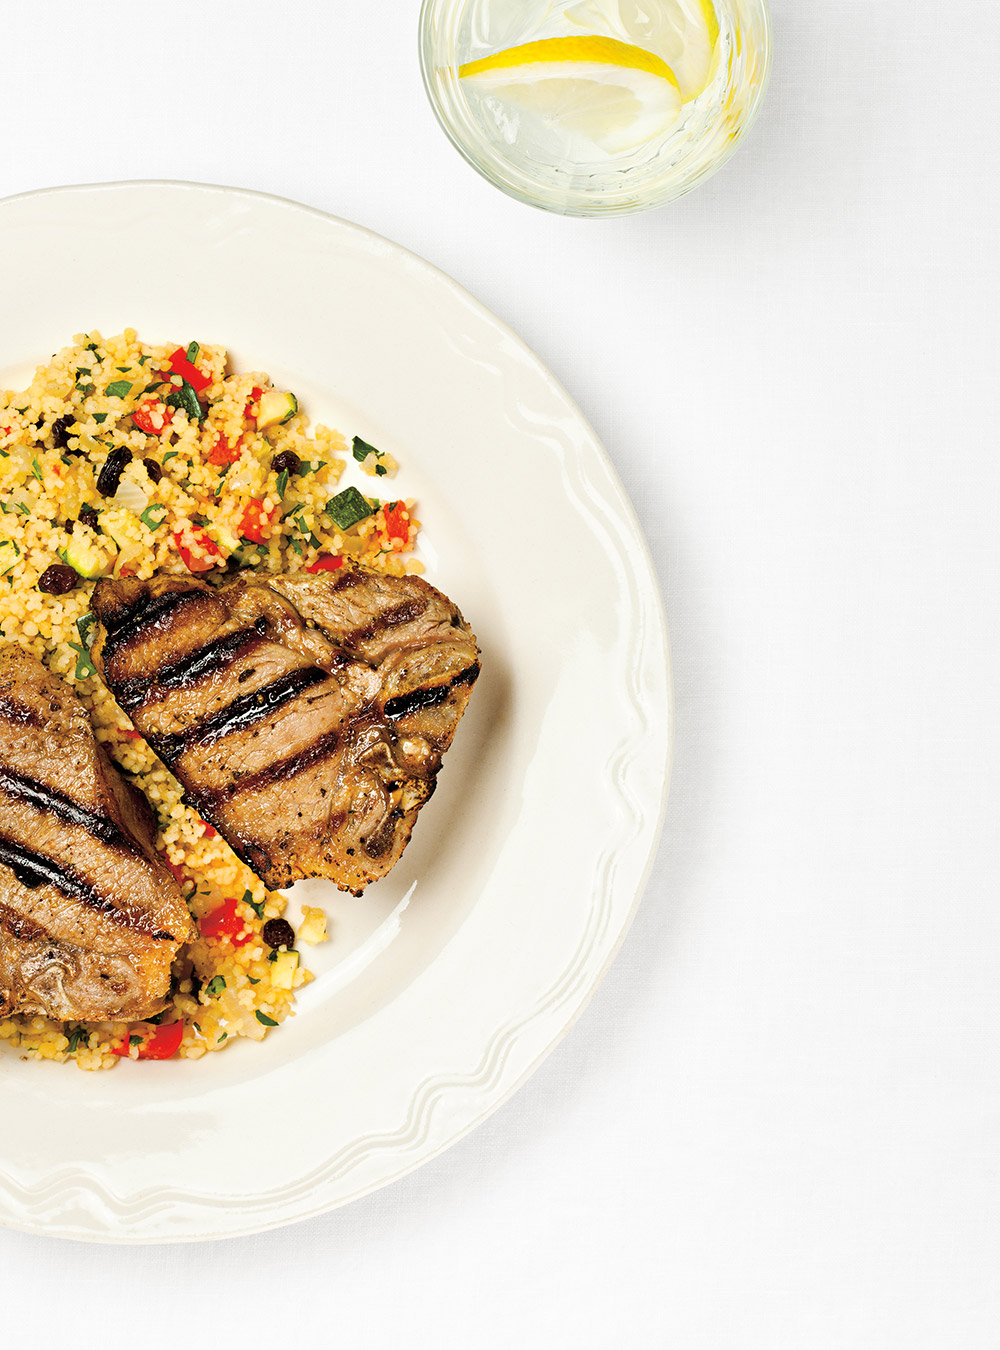 Lamb Loin Couscous : Broiled Cumin Lamb Chops With Curried Couscous ...